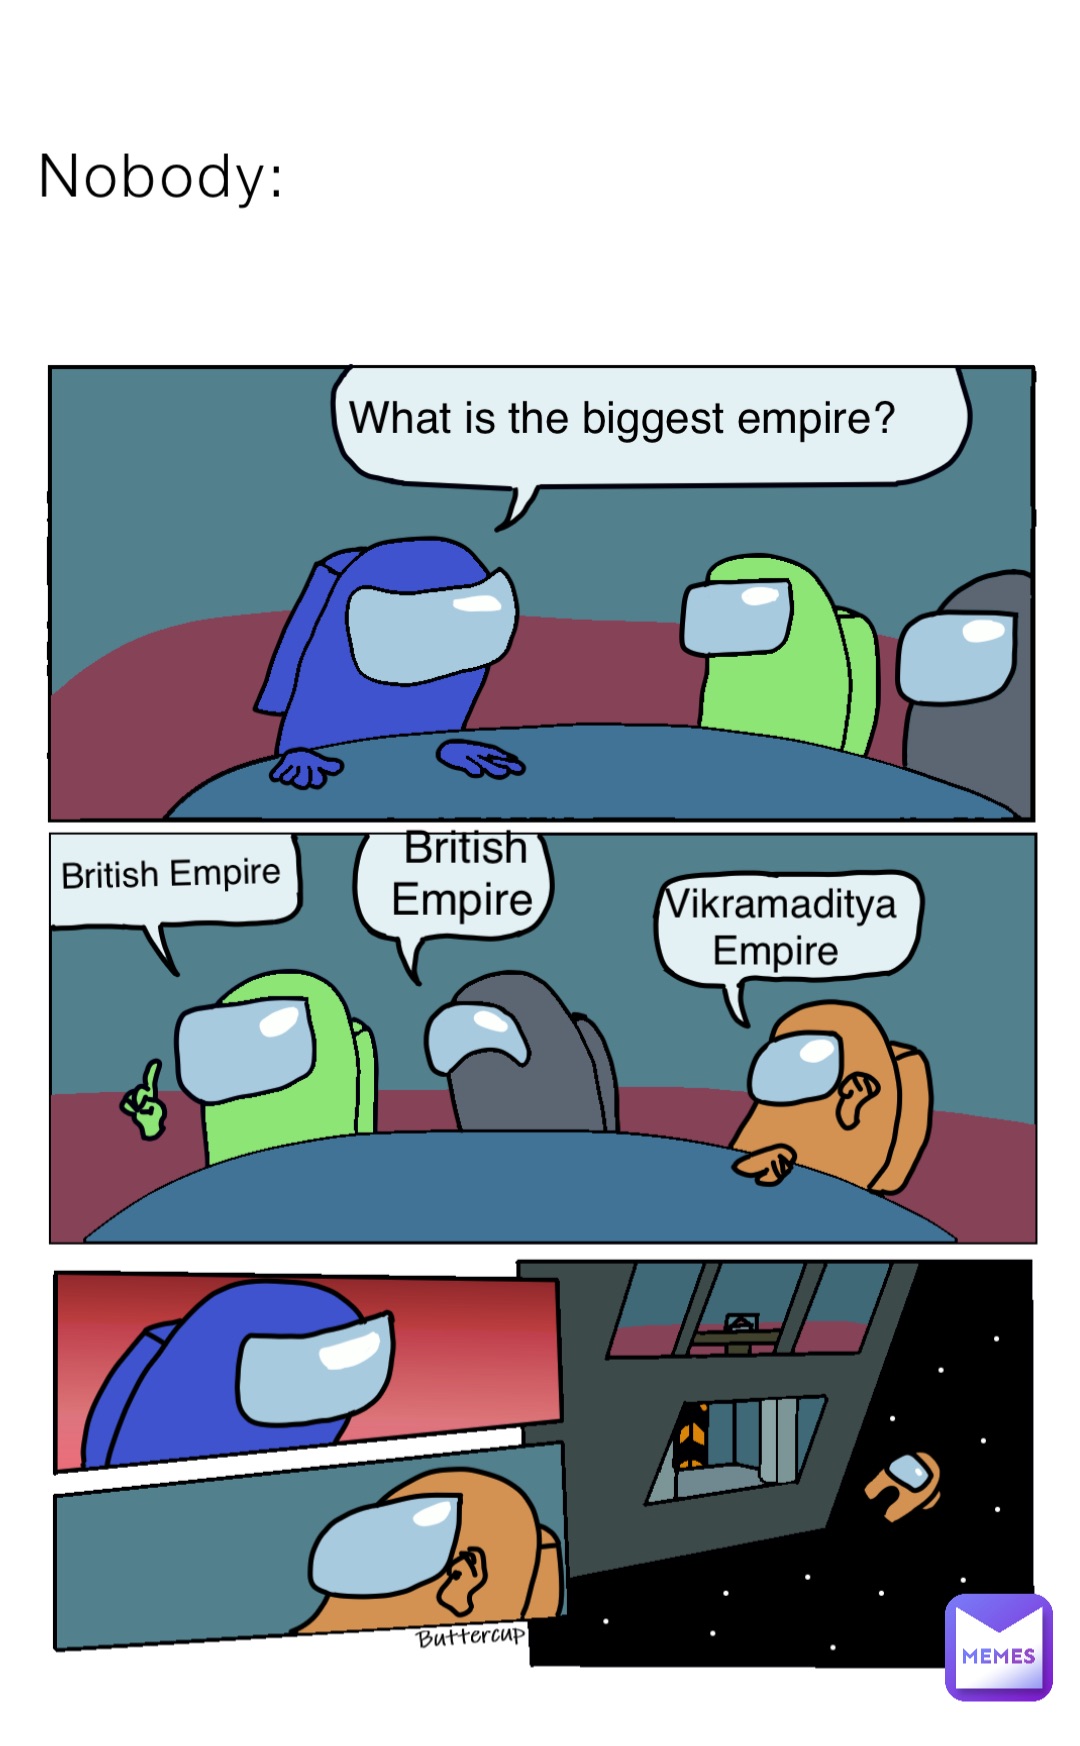 Nobody: What is the biggest empire? British Empire British Empire Vikramaditya Empire